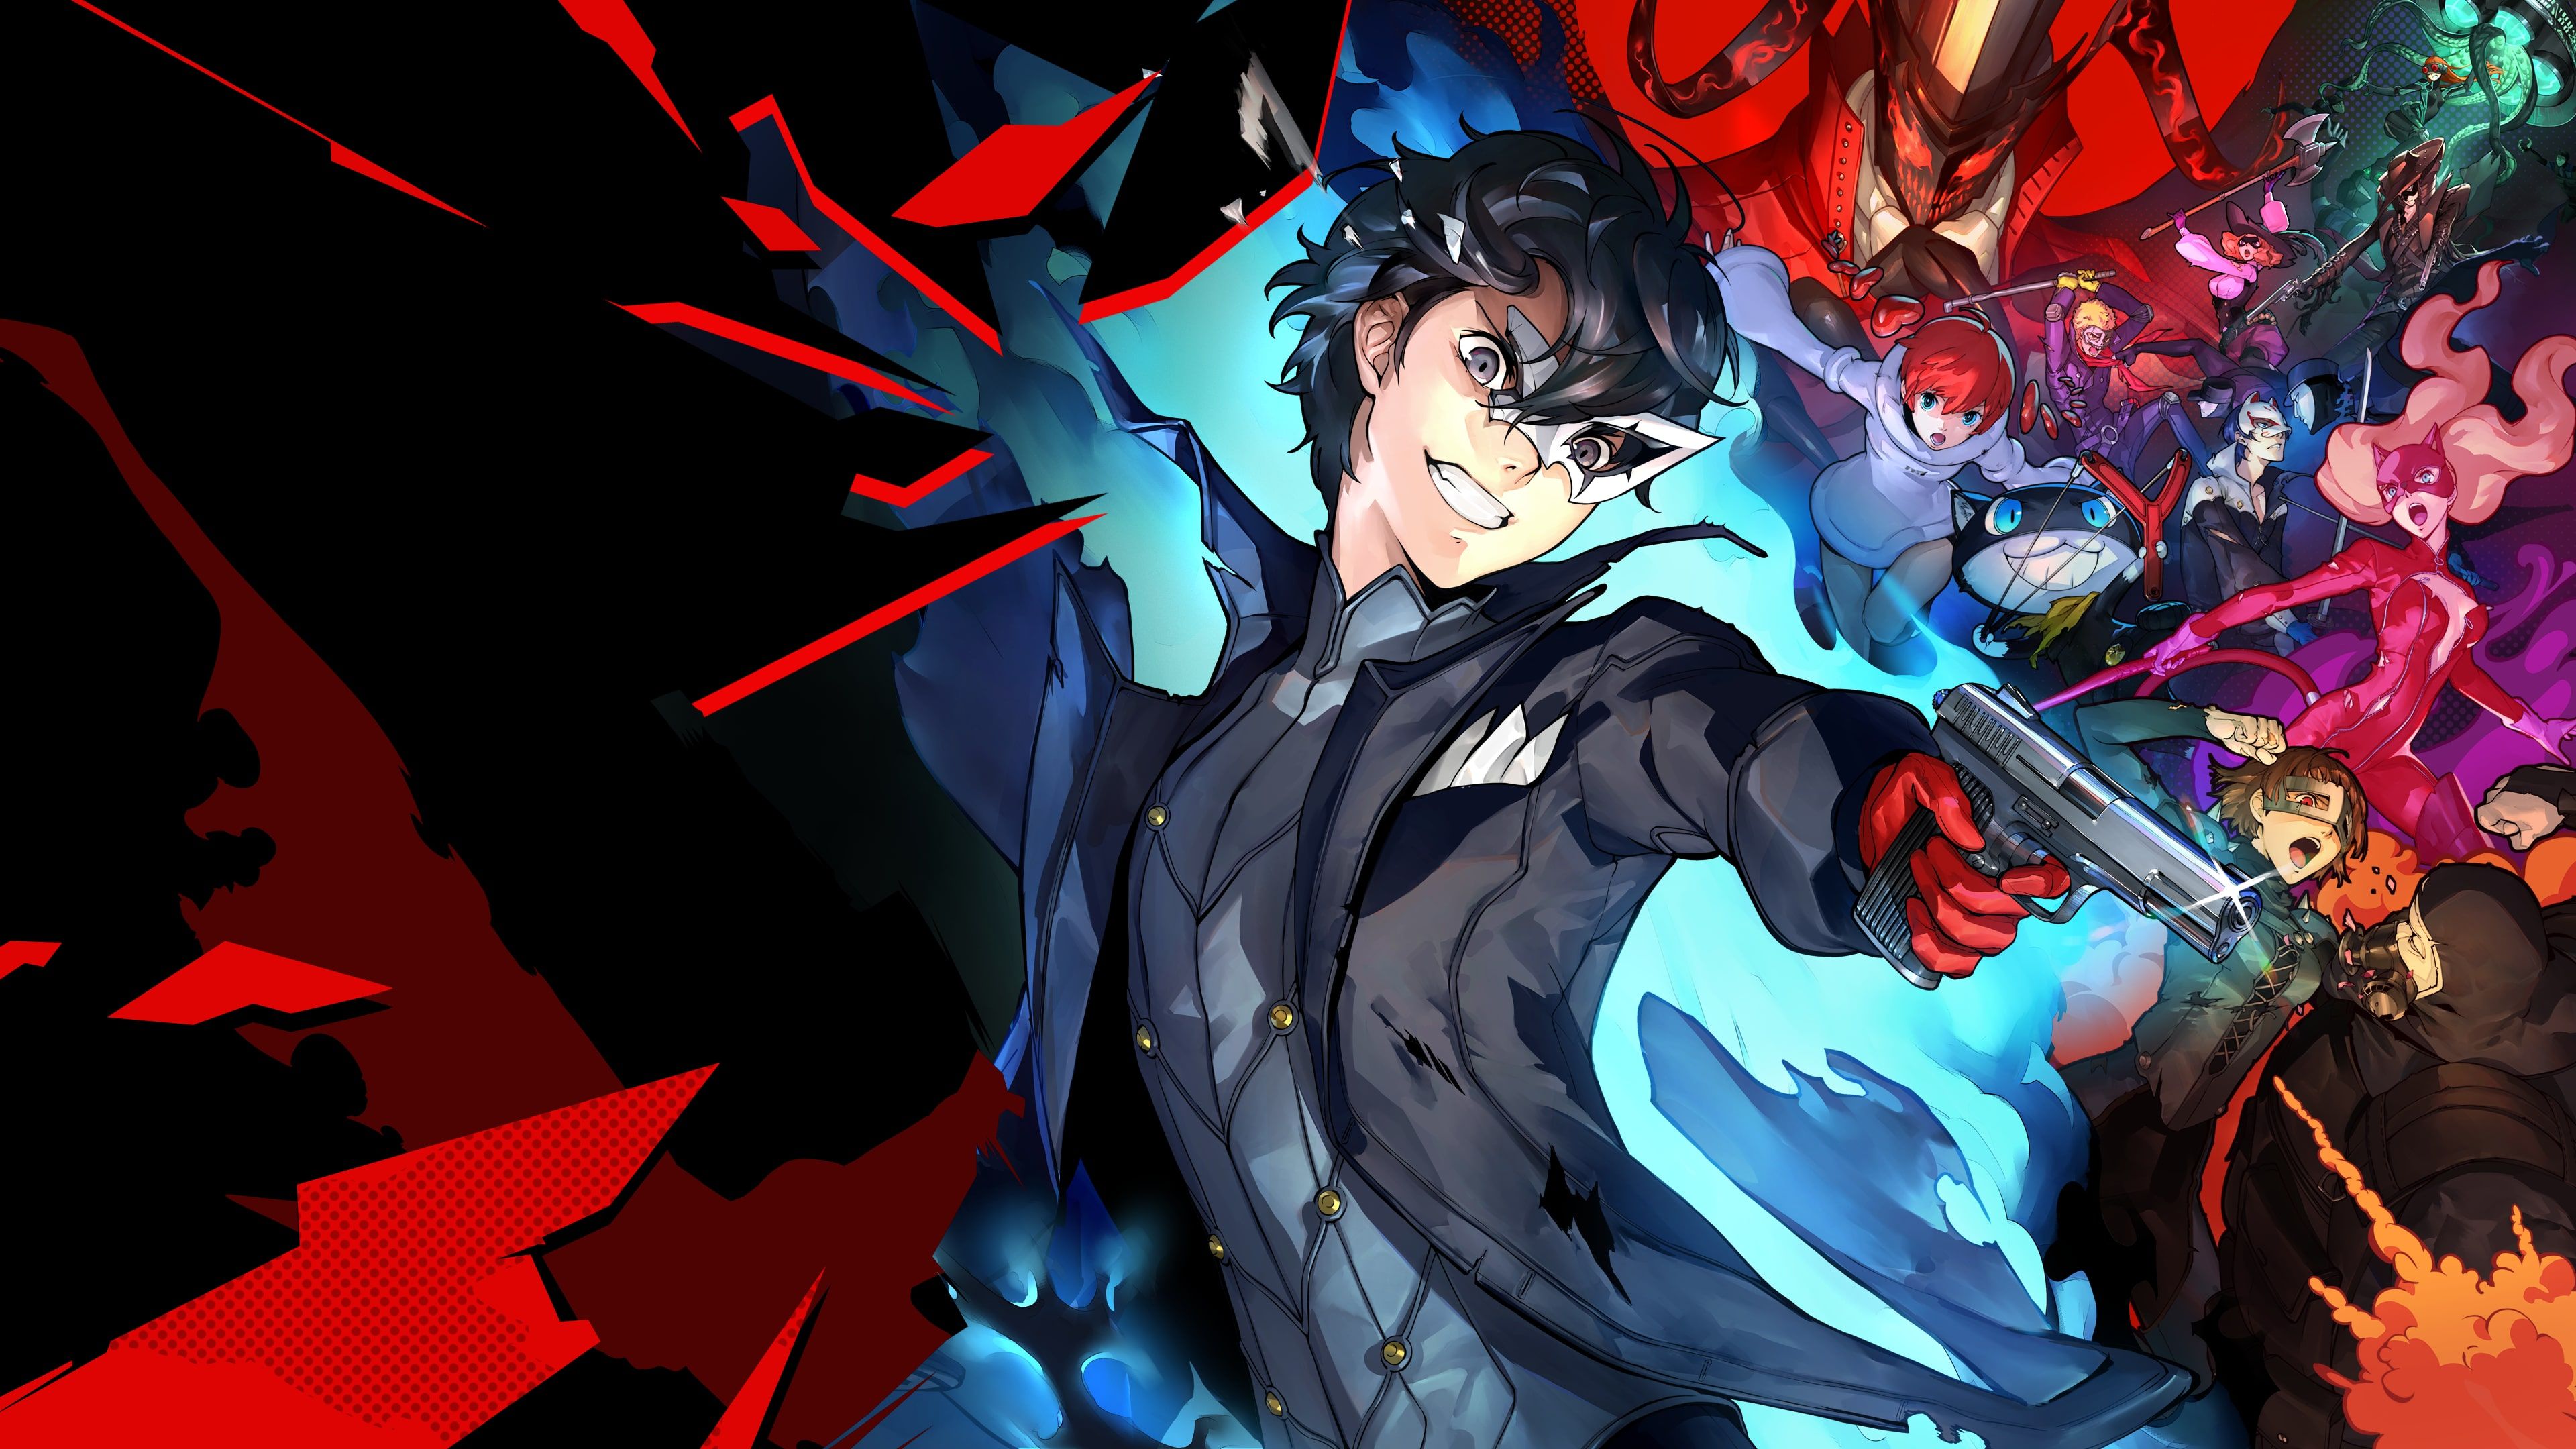 Persona 5 Strikers cover image